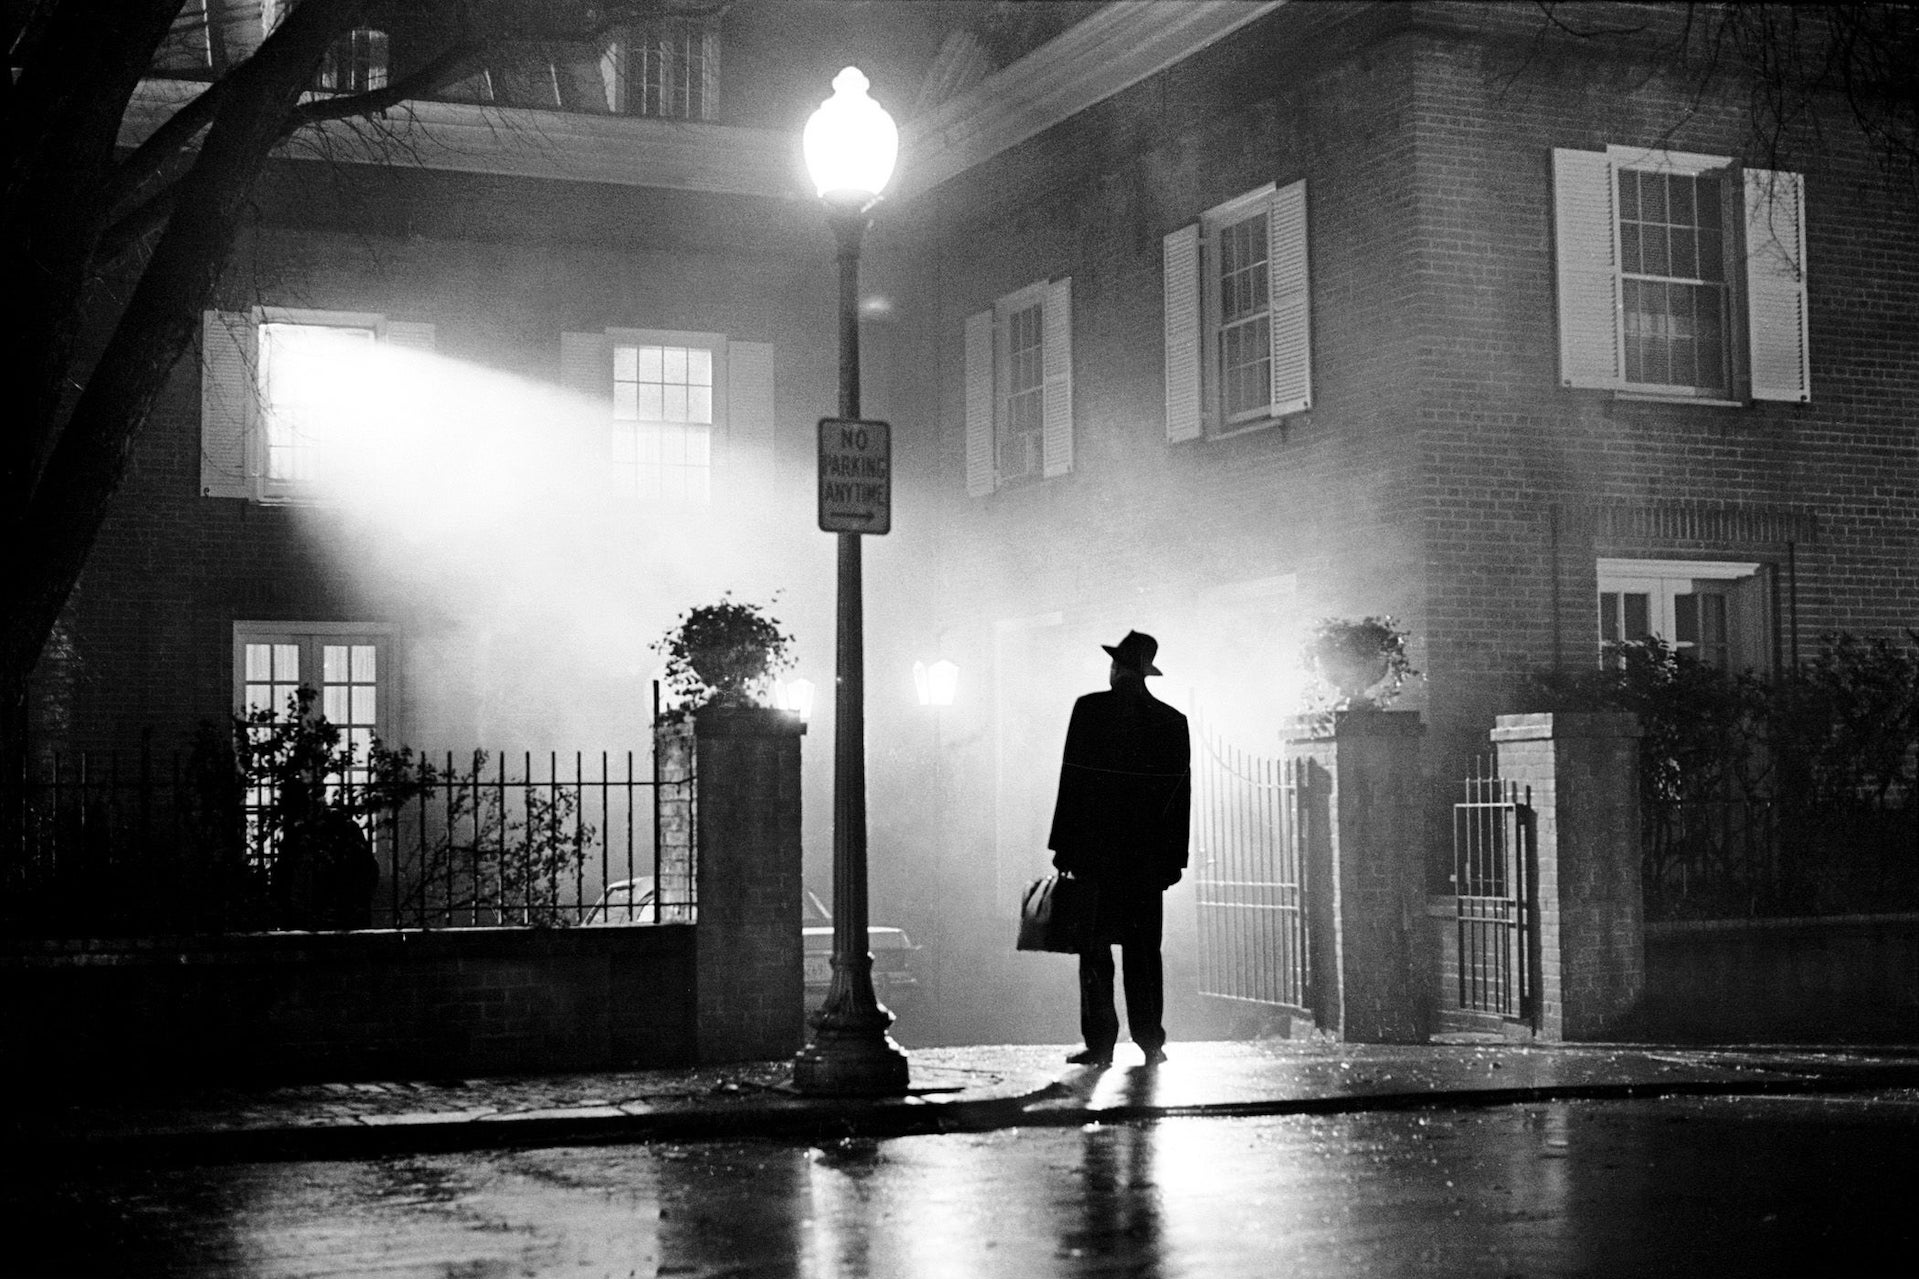 A black-and-white image of a man standing in front of a building. A bright light is shining from one of the windows at the man, making him a silhouette. It has a spooky atmosphere.